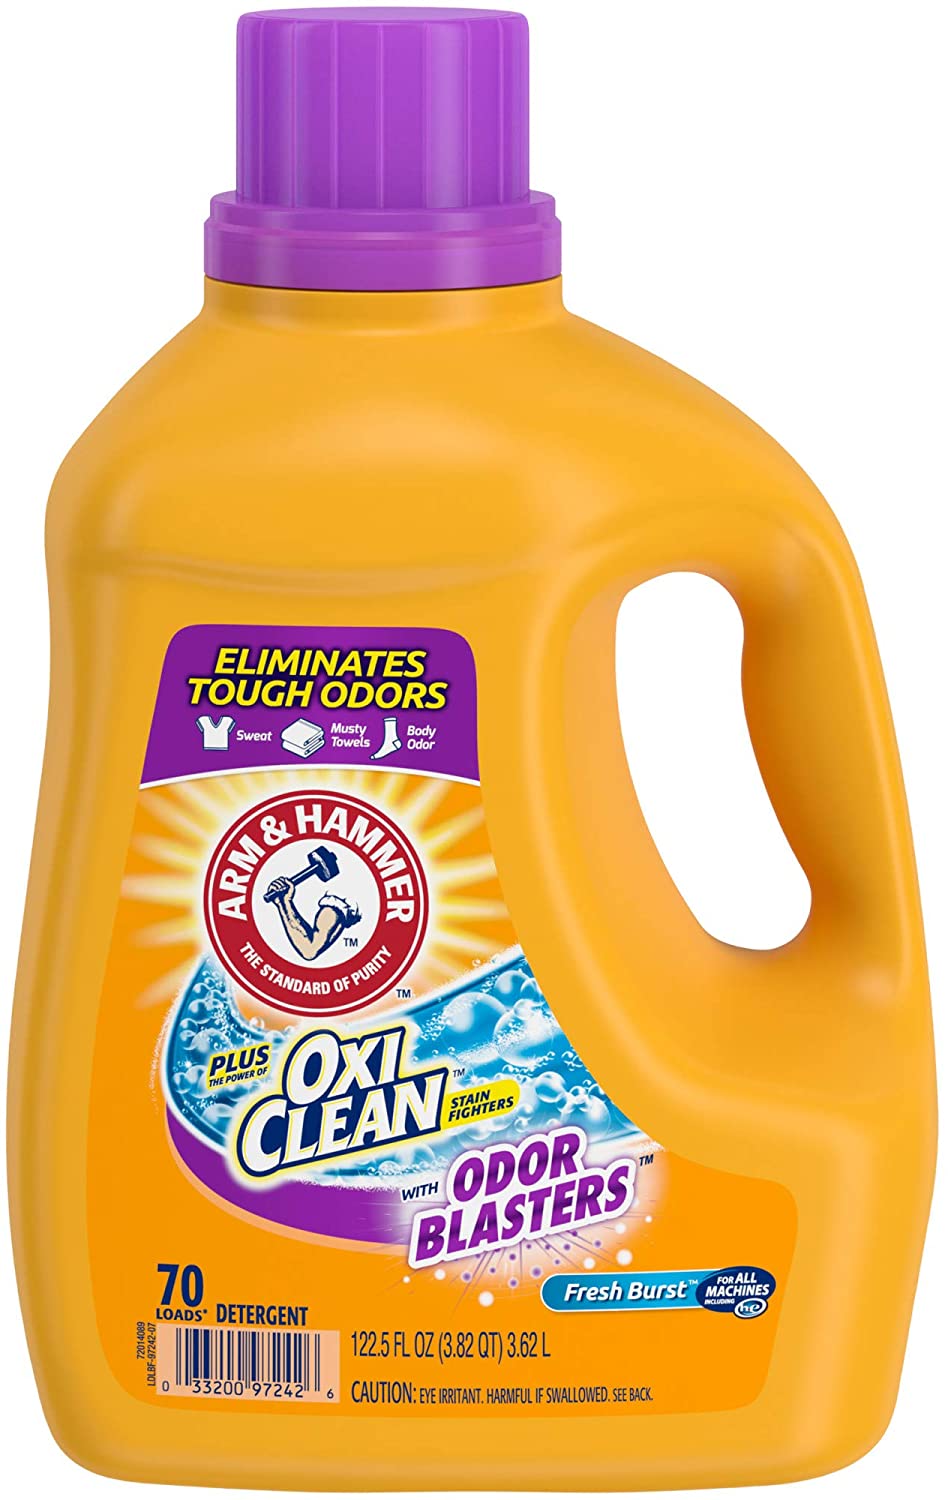 Arm & Hammer Plus OxiClean Odor Blasters Laundry Detergent, 70 loads 7.44